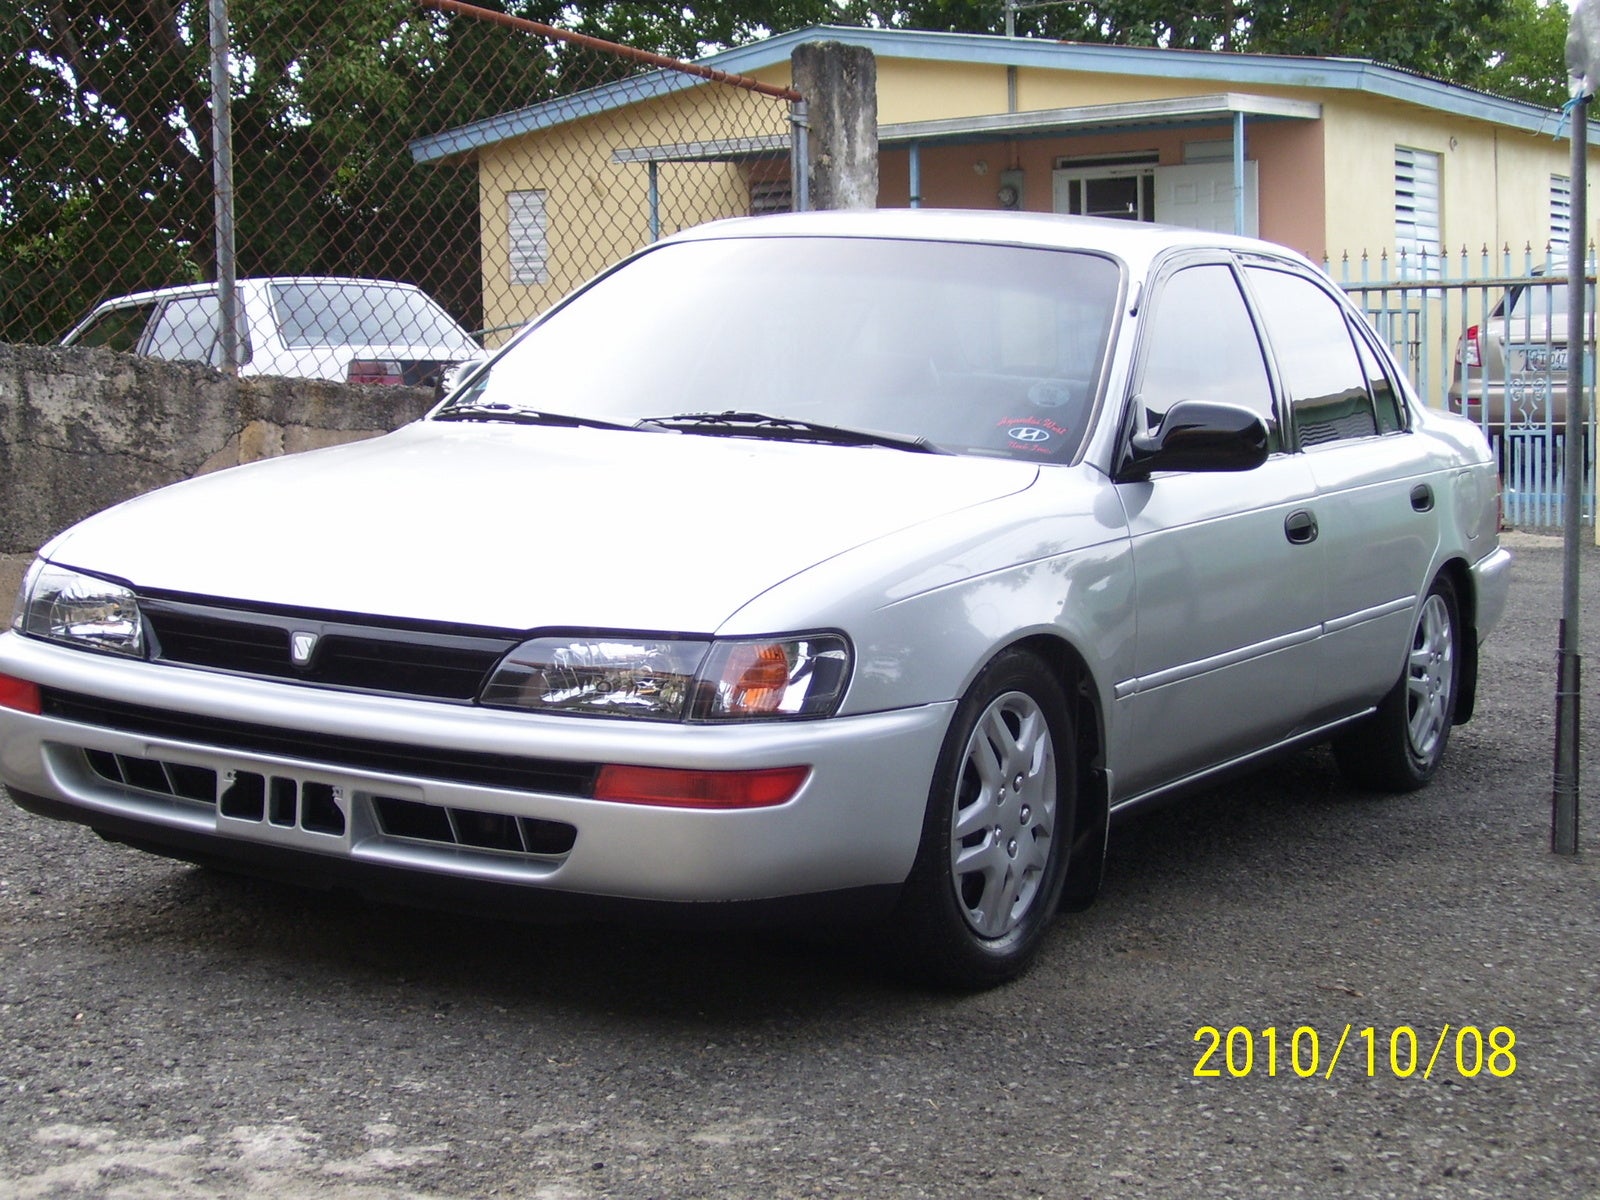 1994 toyota corolla used parts #3